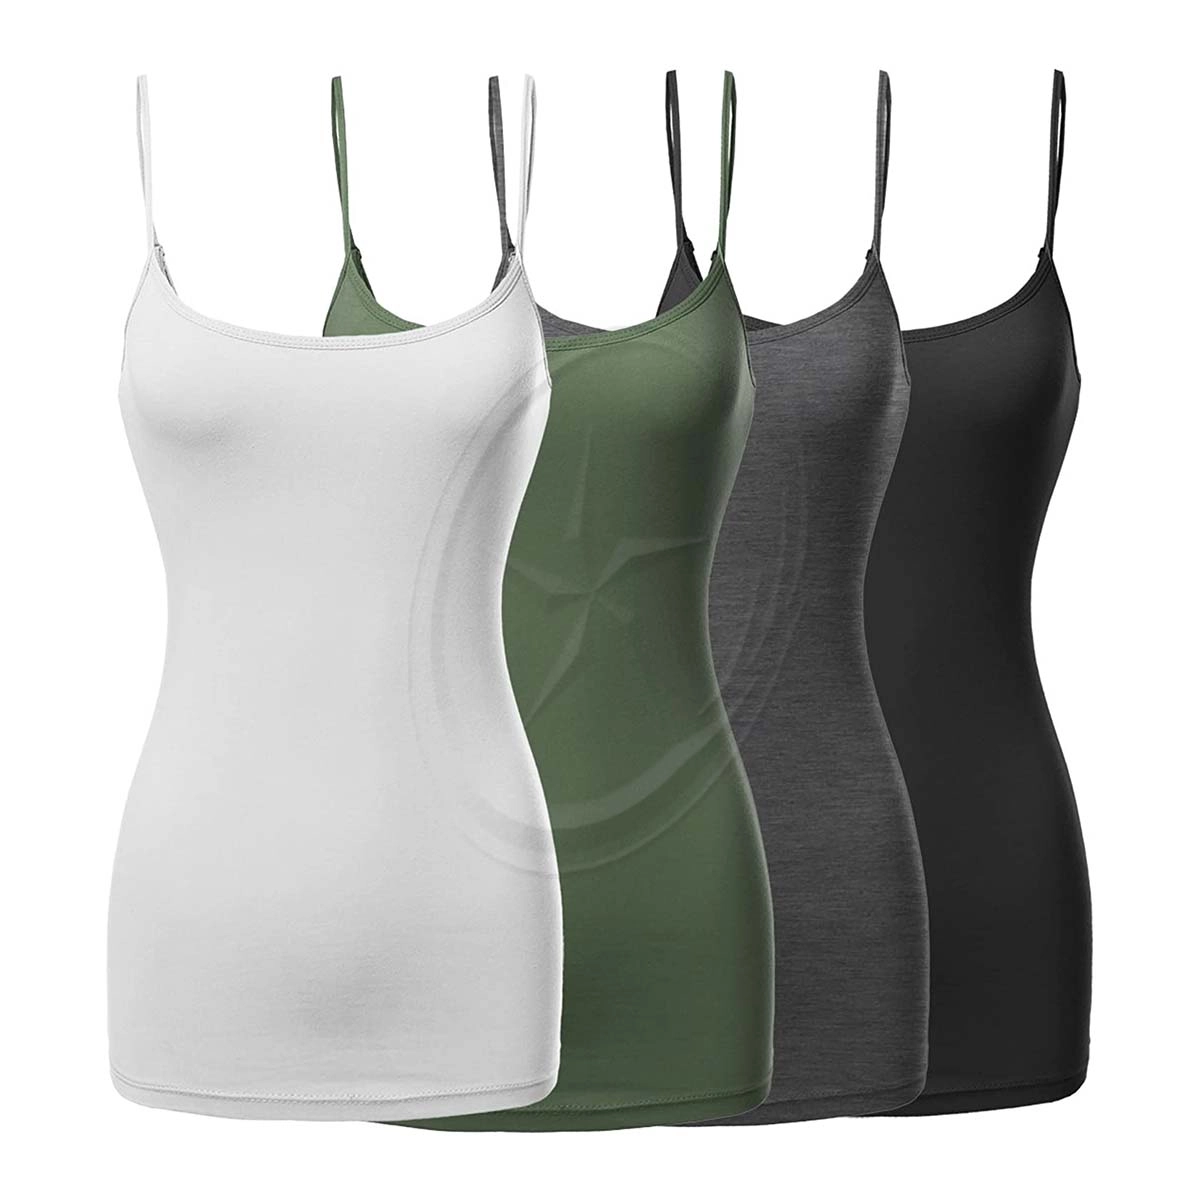 Women's Basic Solid Long Length Adjustable Spaghetti Strap Tank Top Wholesale Supplier